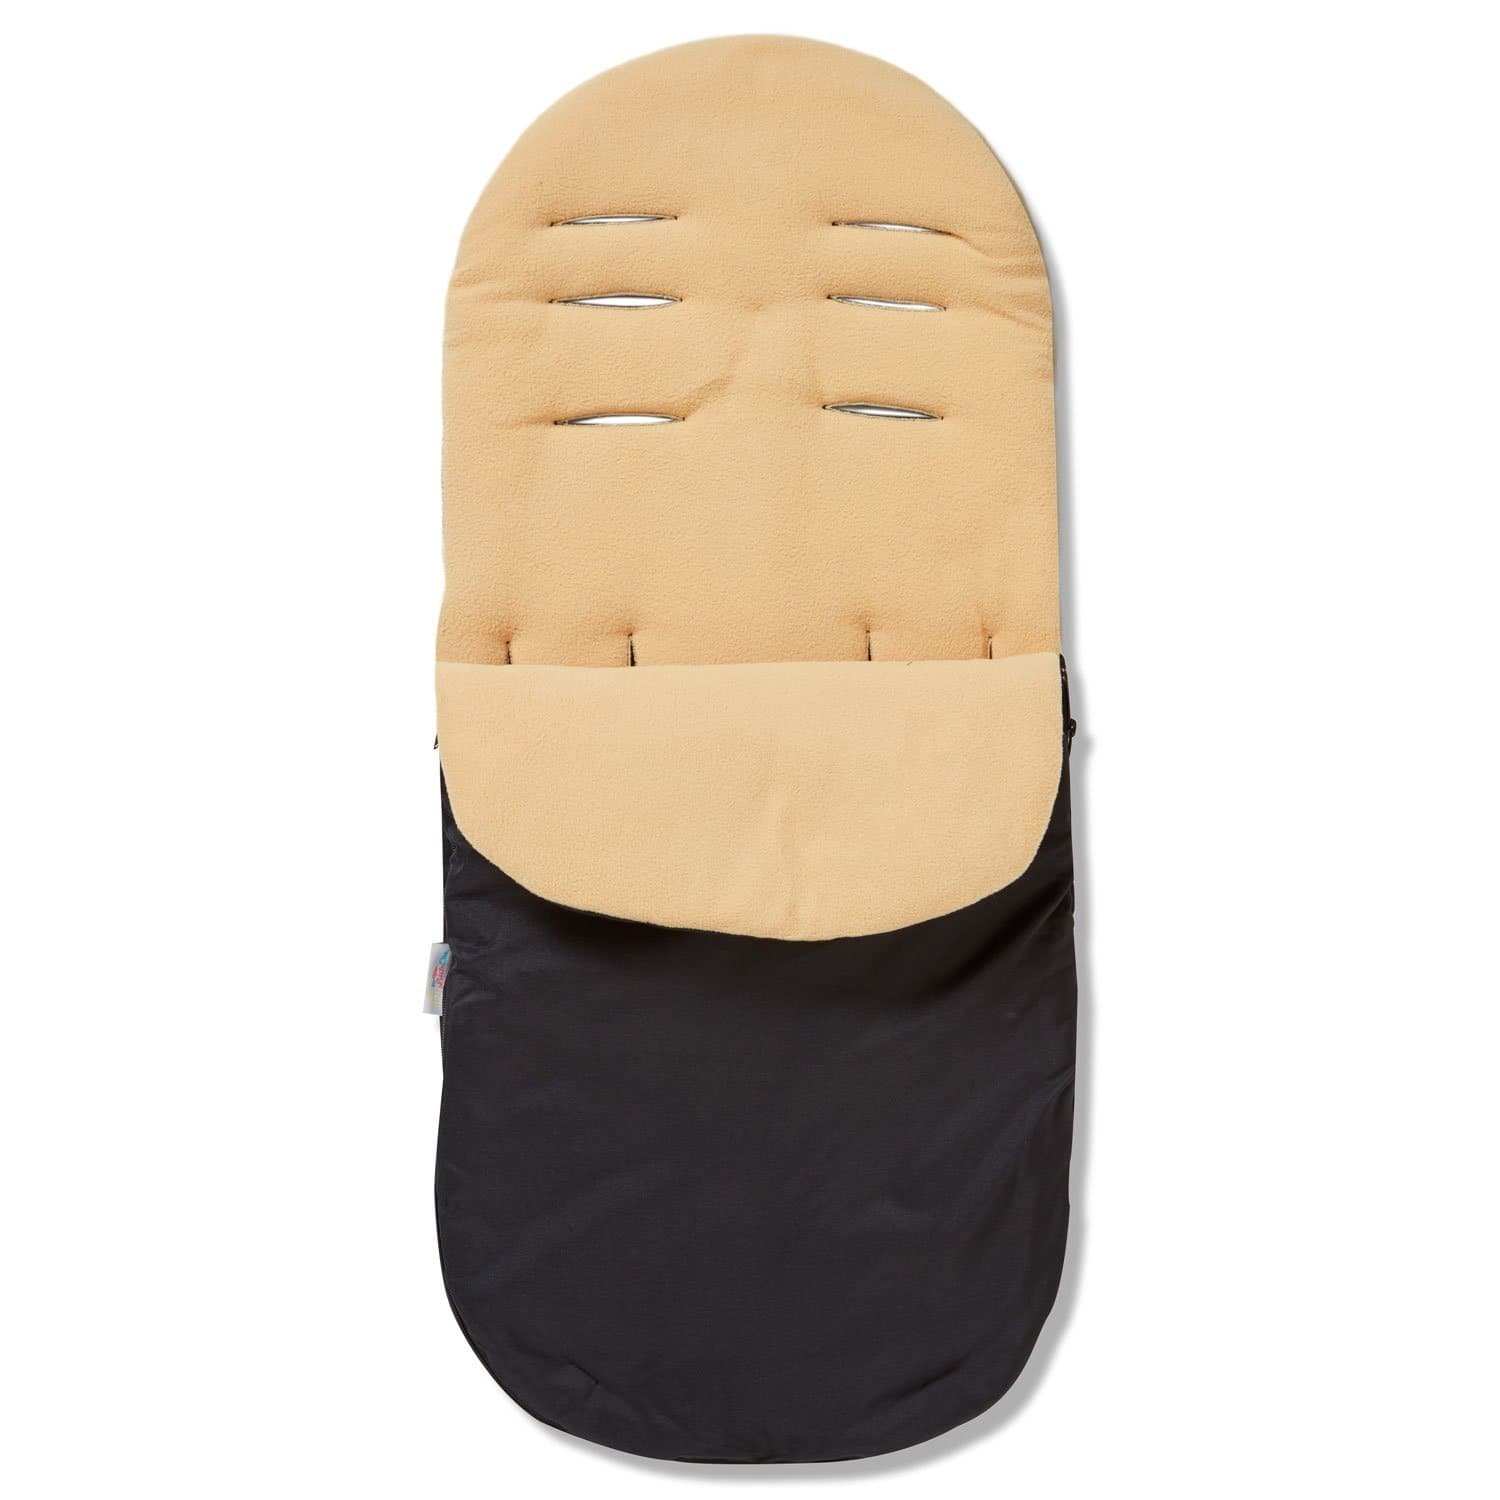 Footmuff / Cosy Toes Compatible with Ickle Bubba - Sand / Fits All Models | For Your Little One